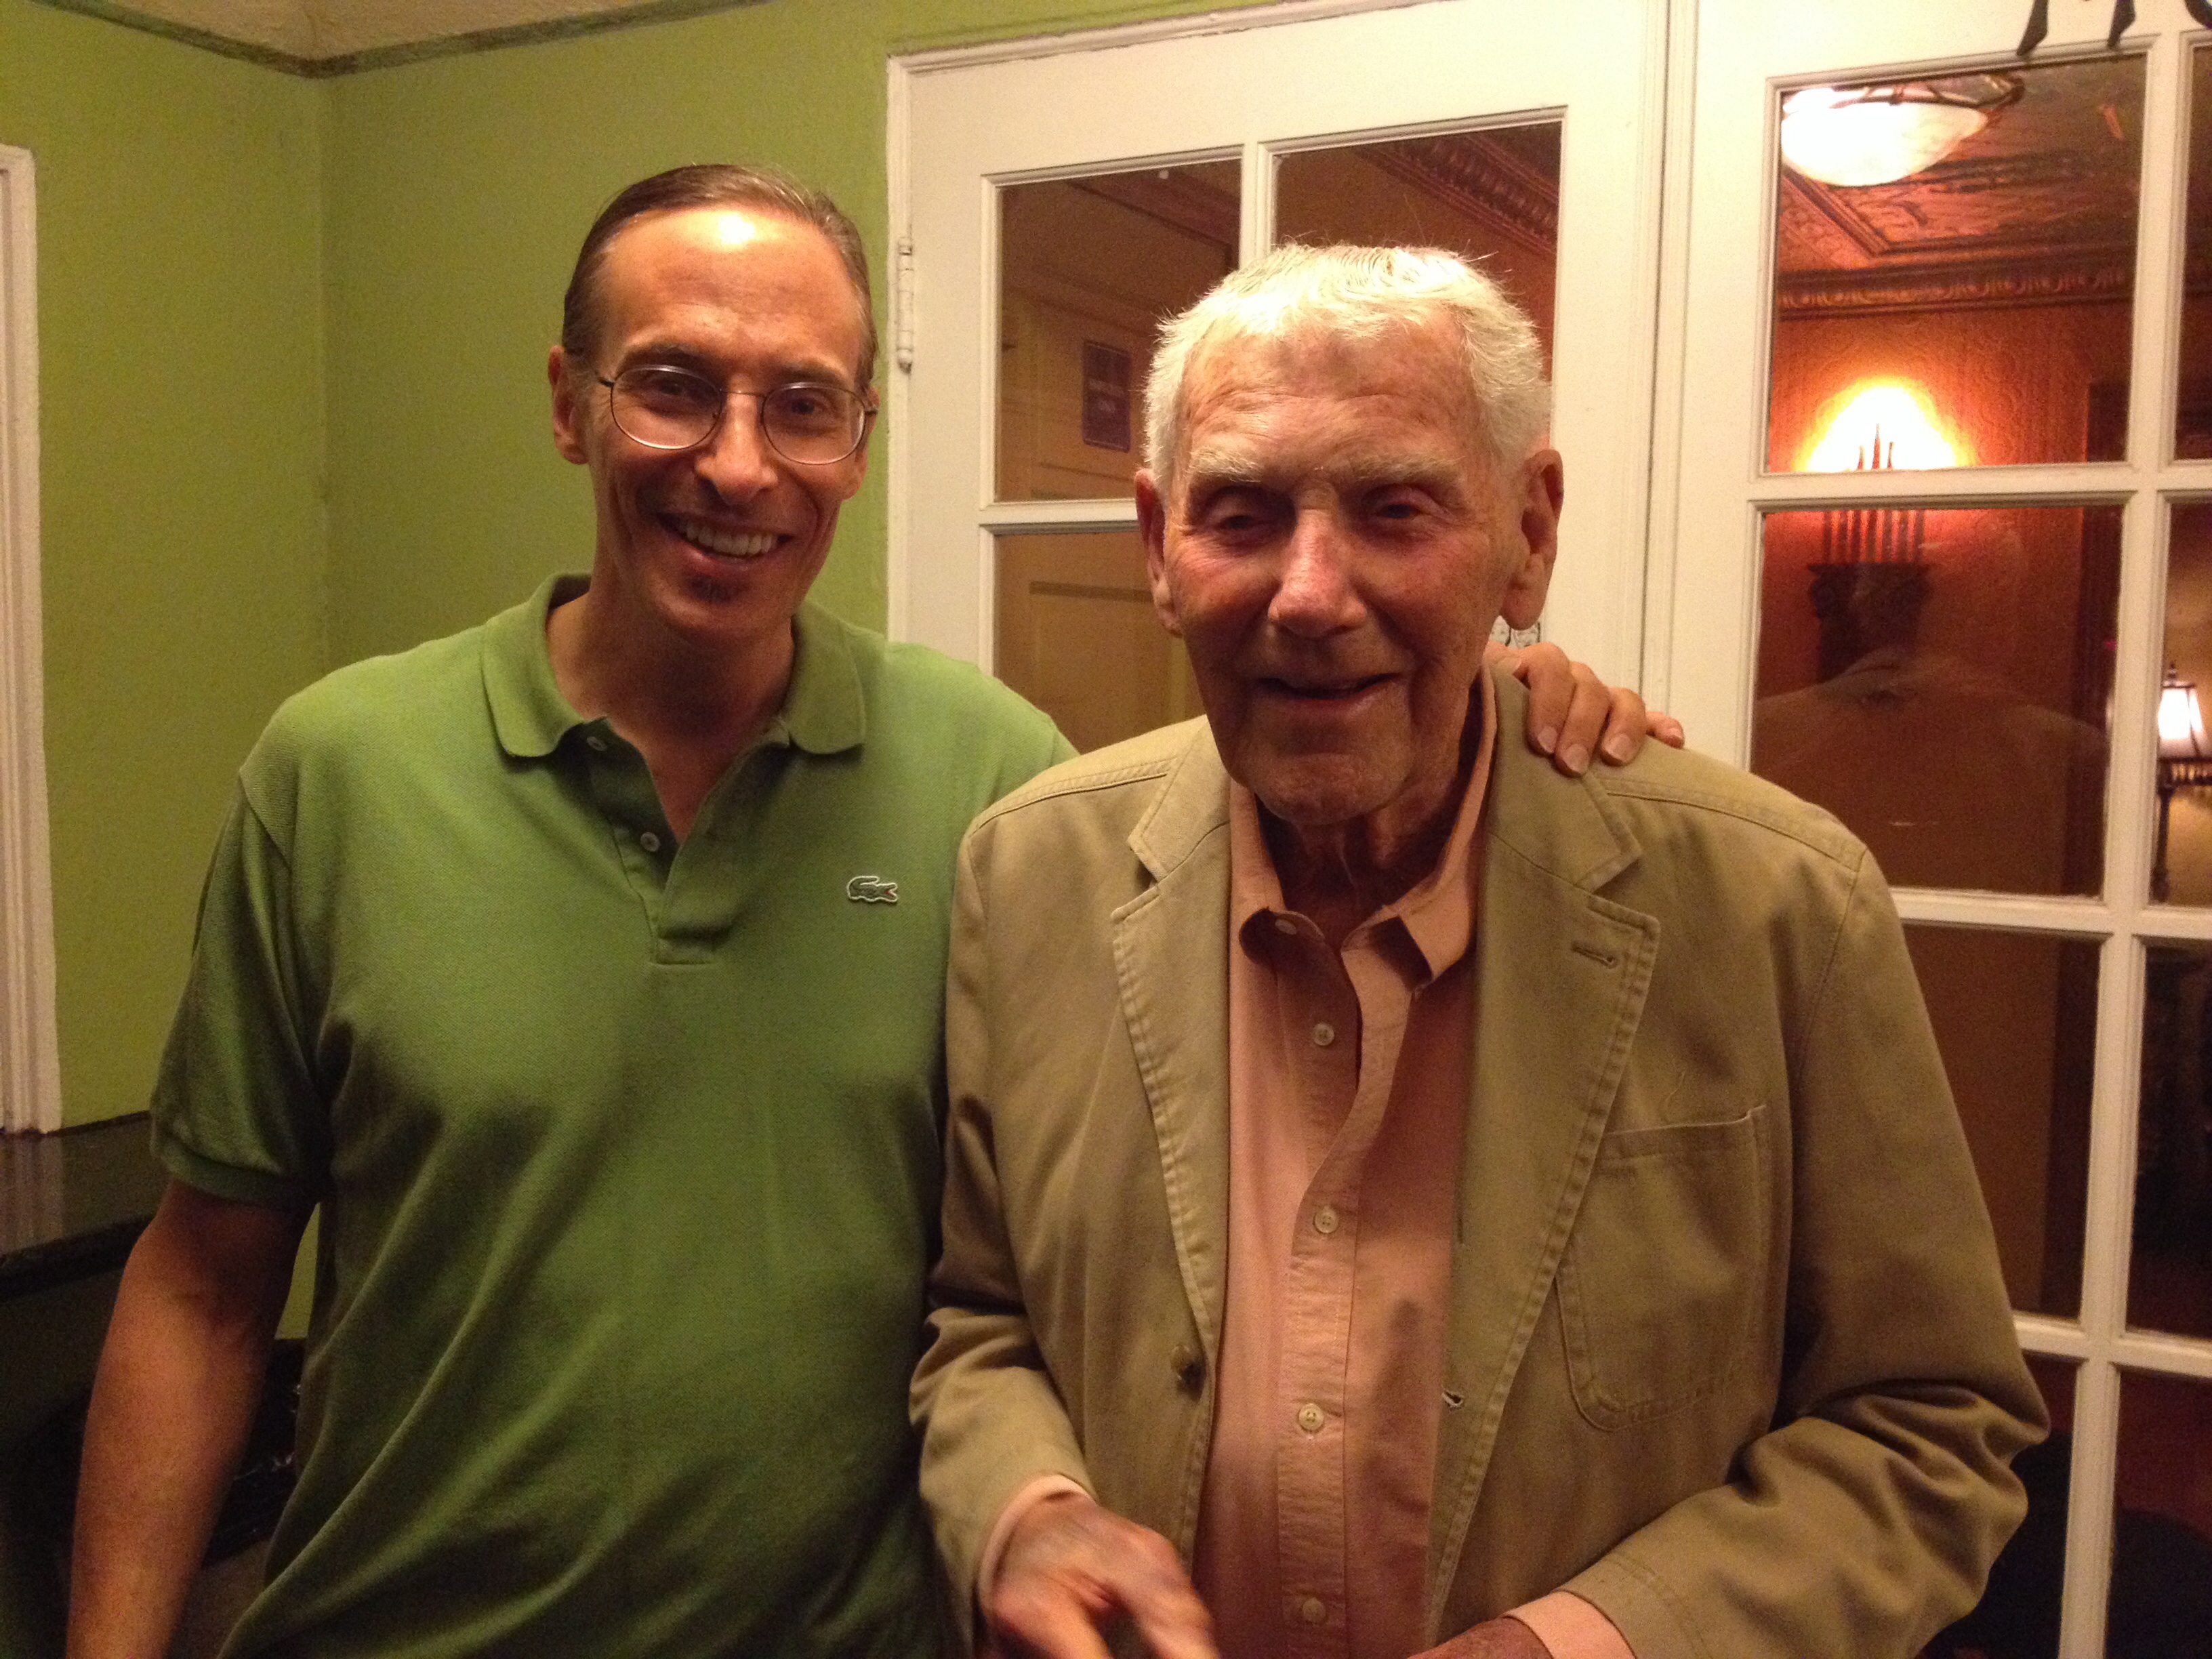 George Pappy with Producer/Director Robert Butler - 13 August 2014 screening of The Green Girl at the Old Town Music Hall in El Segundo, CA.